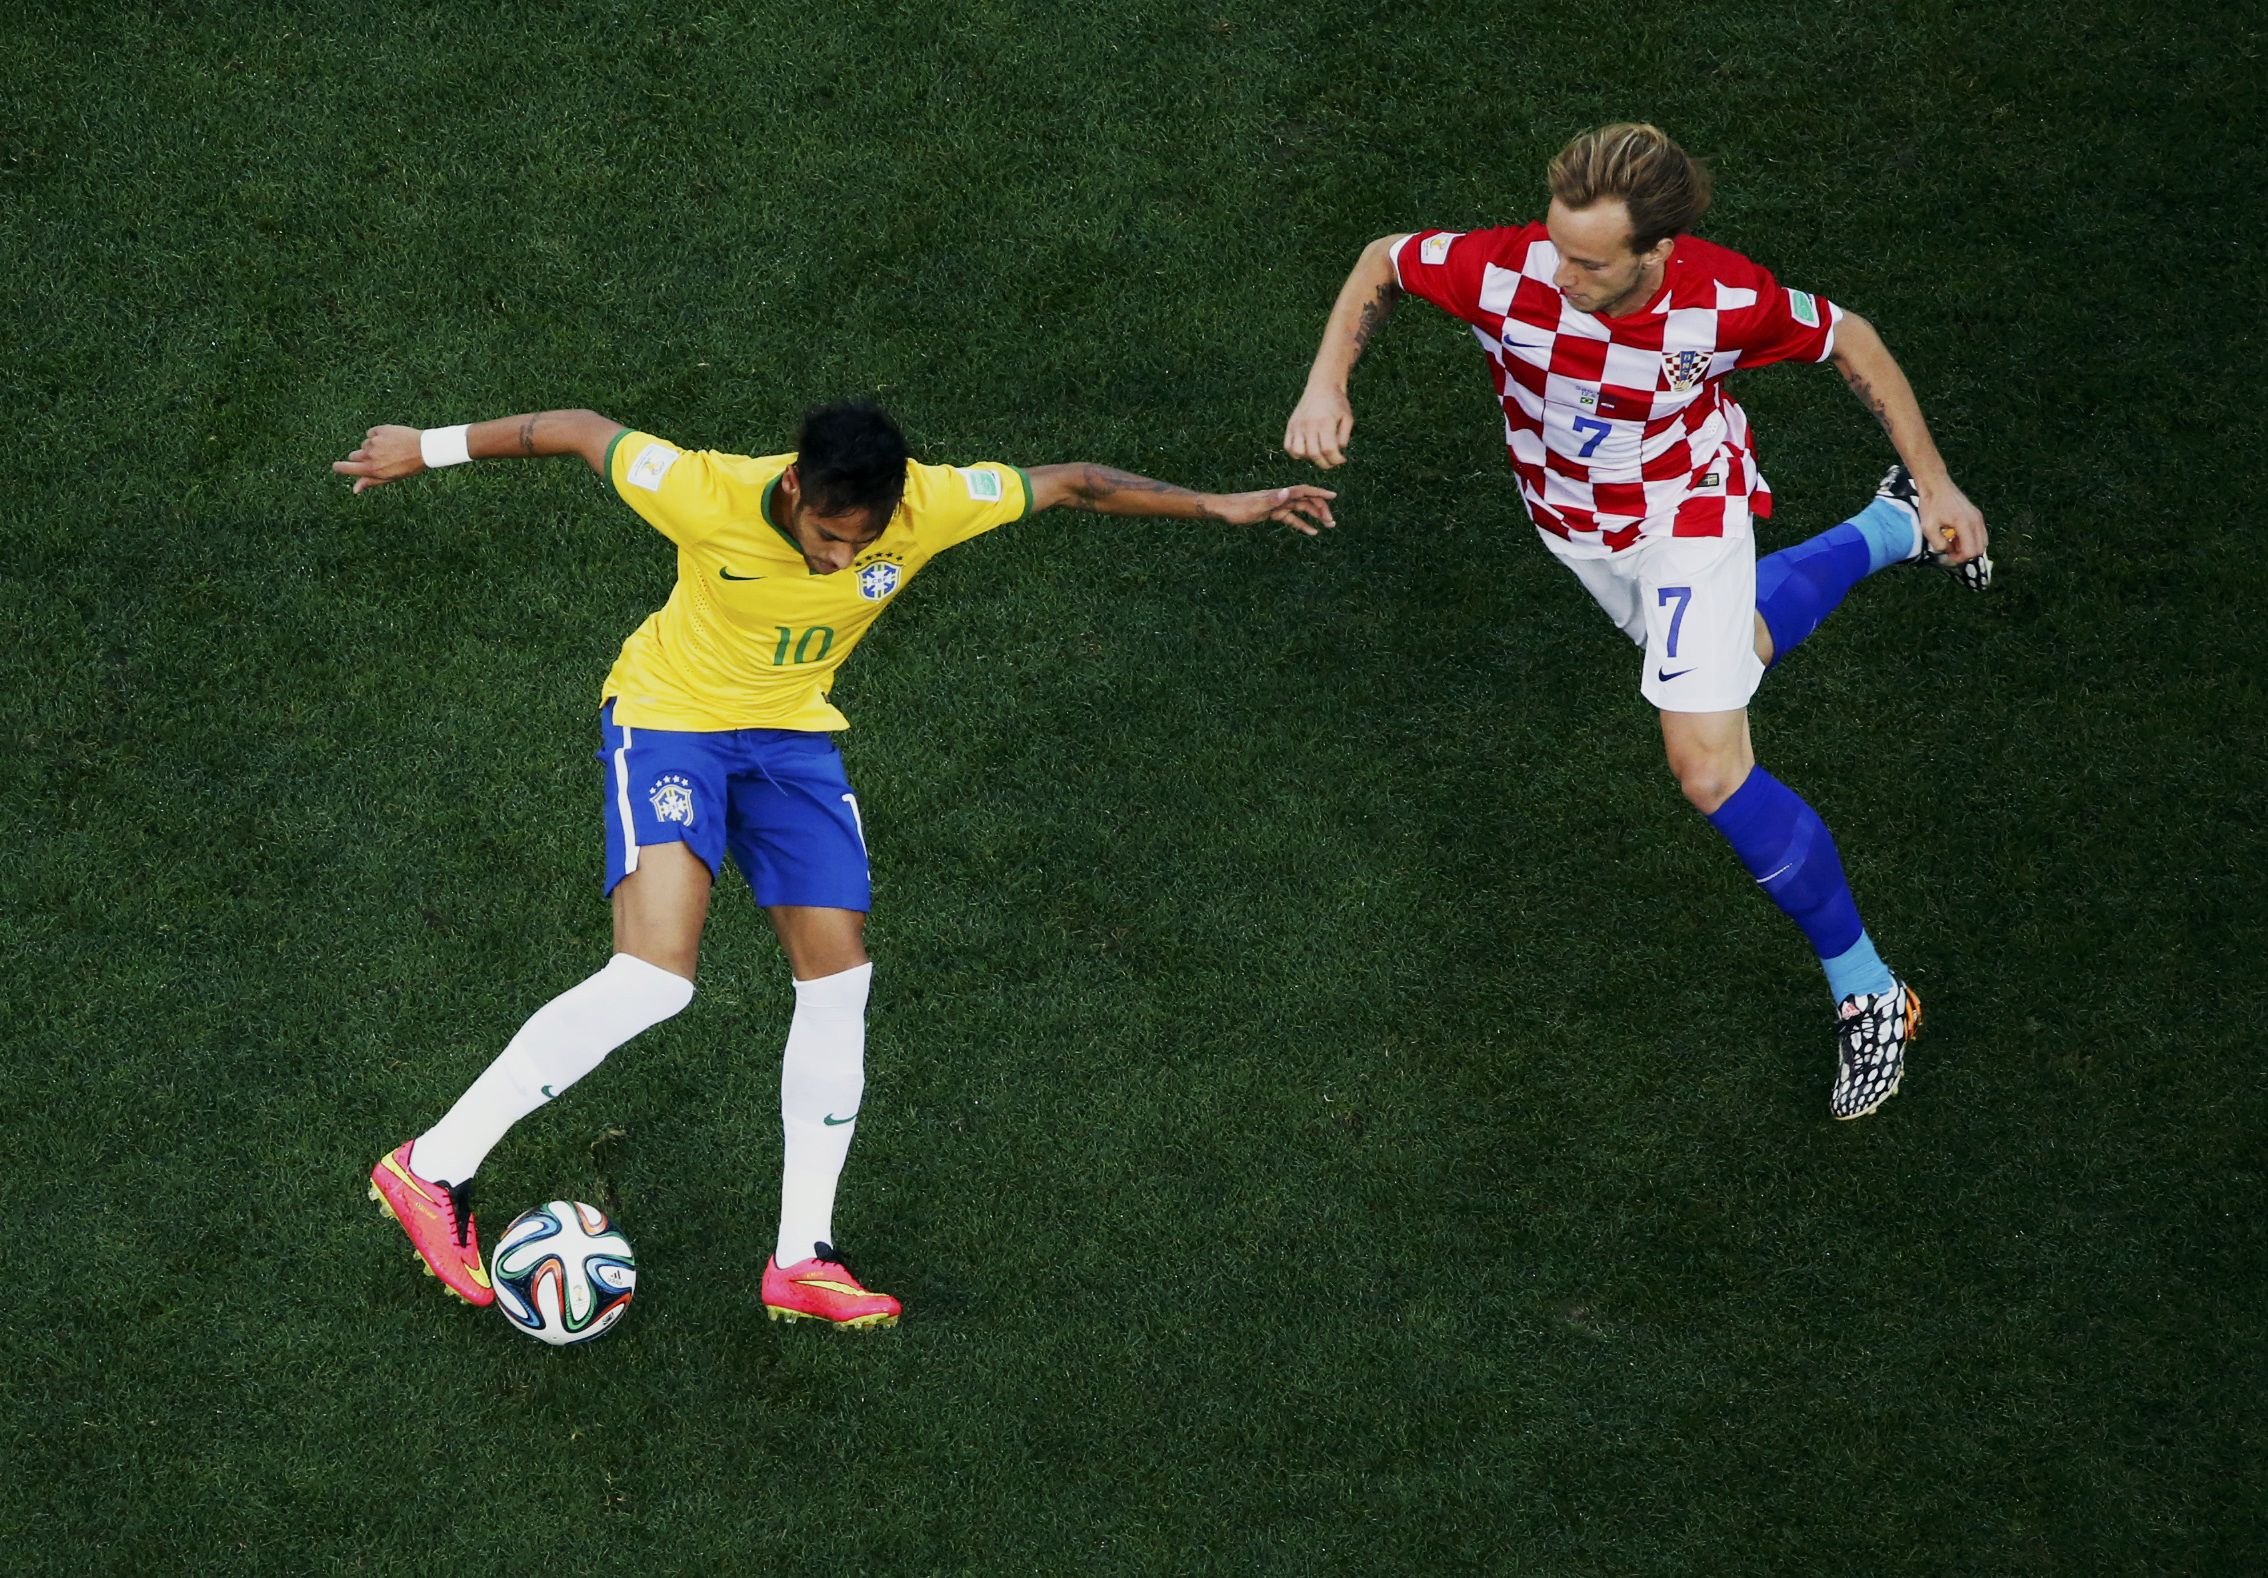 Brazil's Neymar fights for the ball with Croatia's Ivan Rakitic during their 2014 World Cup opening match at the Corinthians arena in Sao Paulo on June 12, 2014.